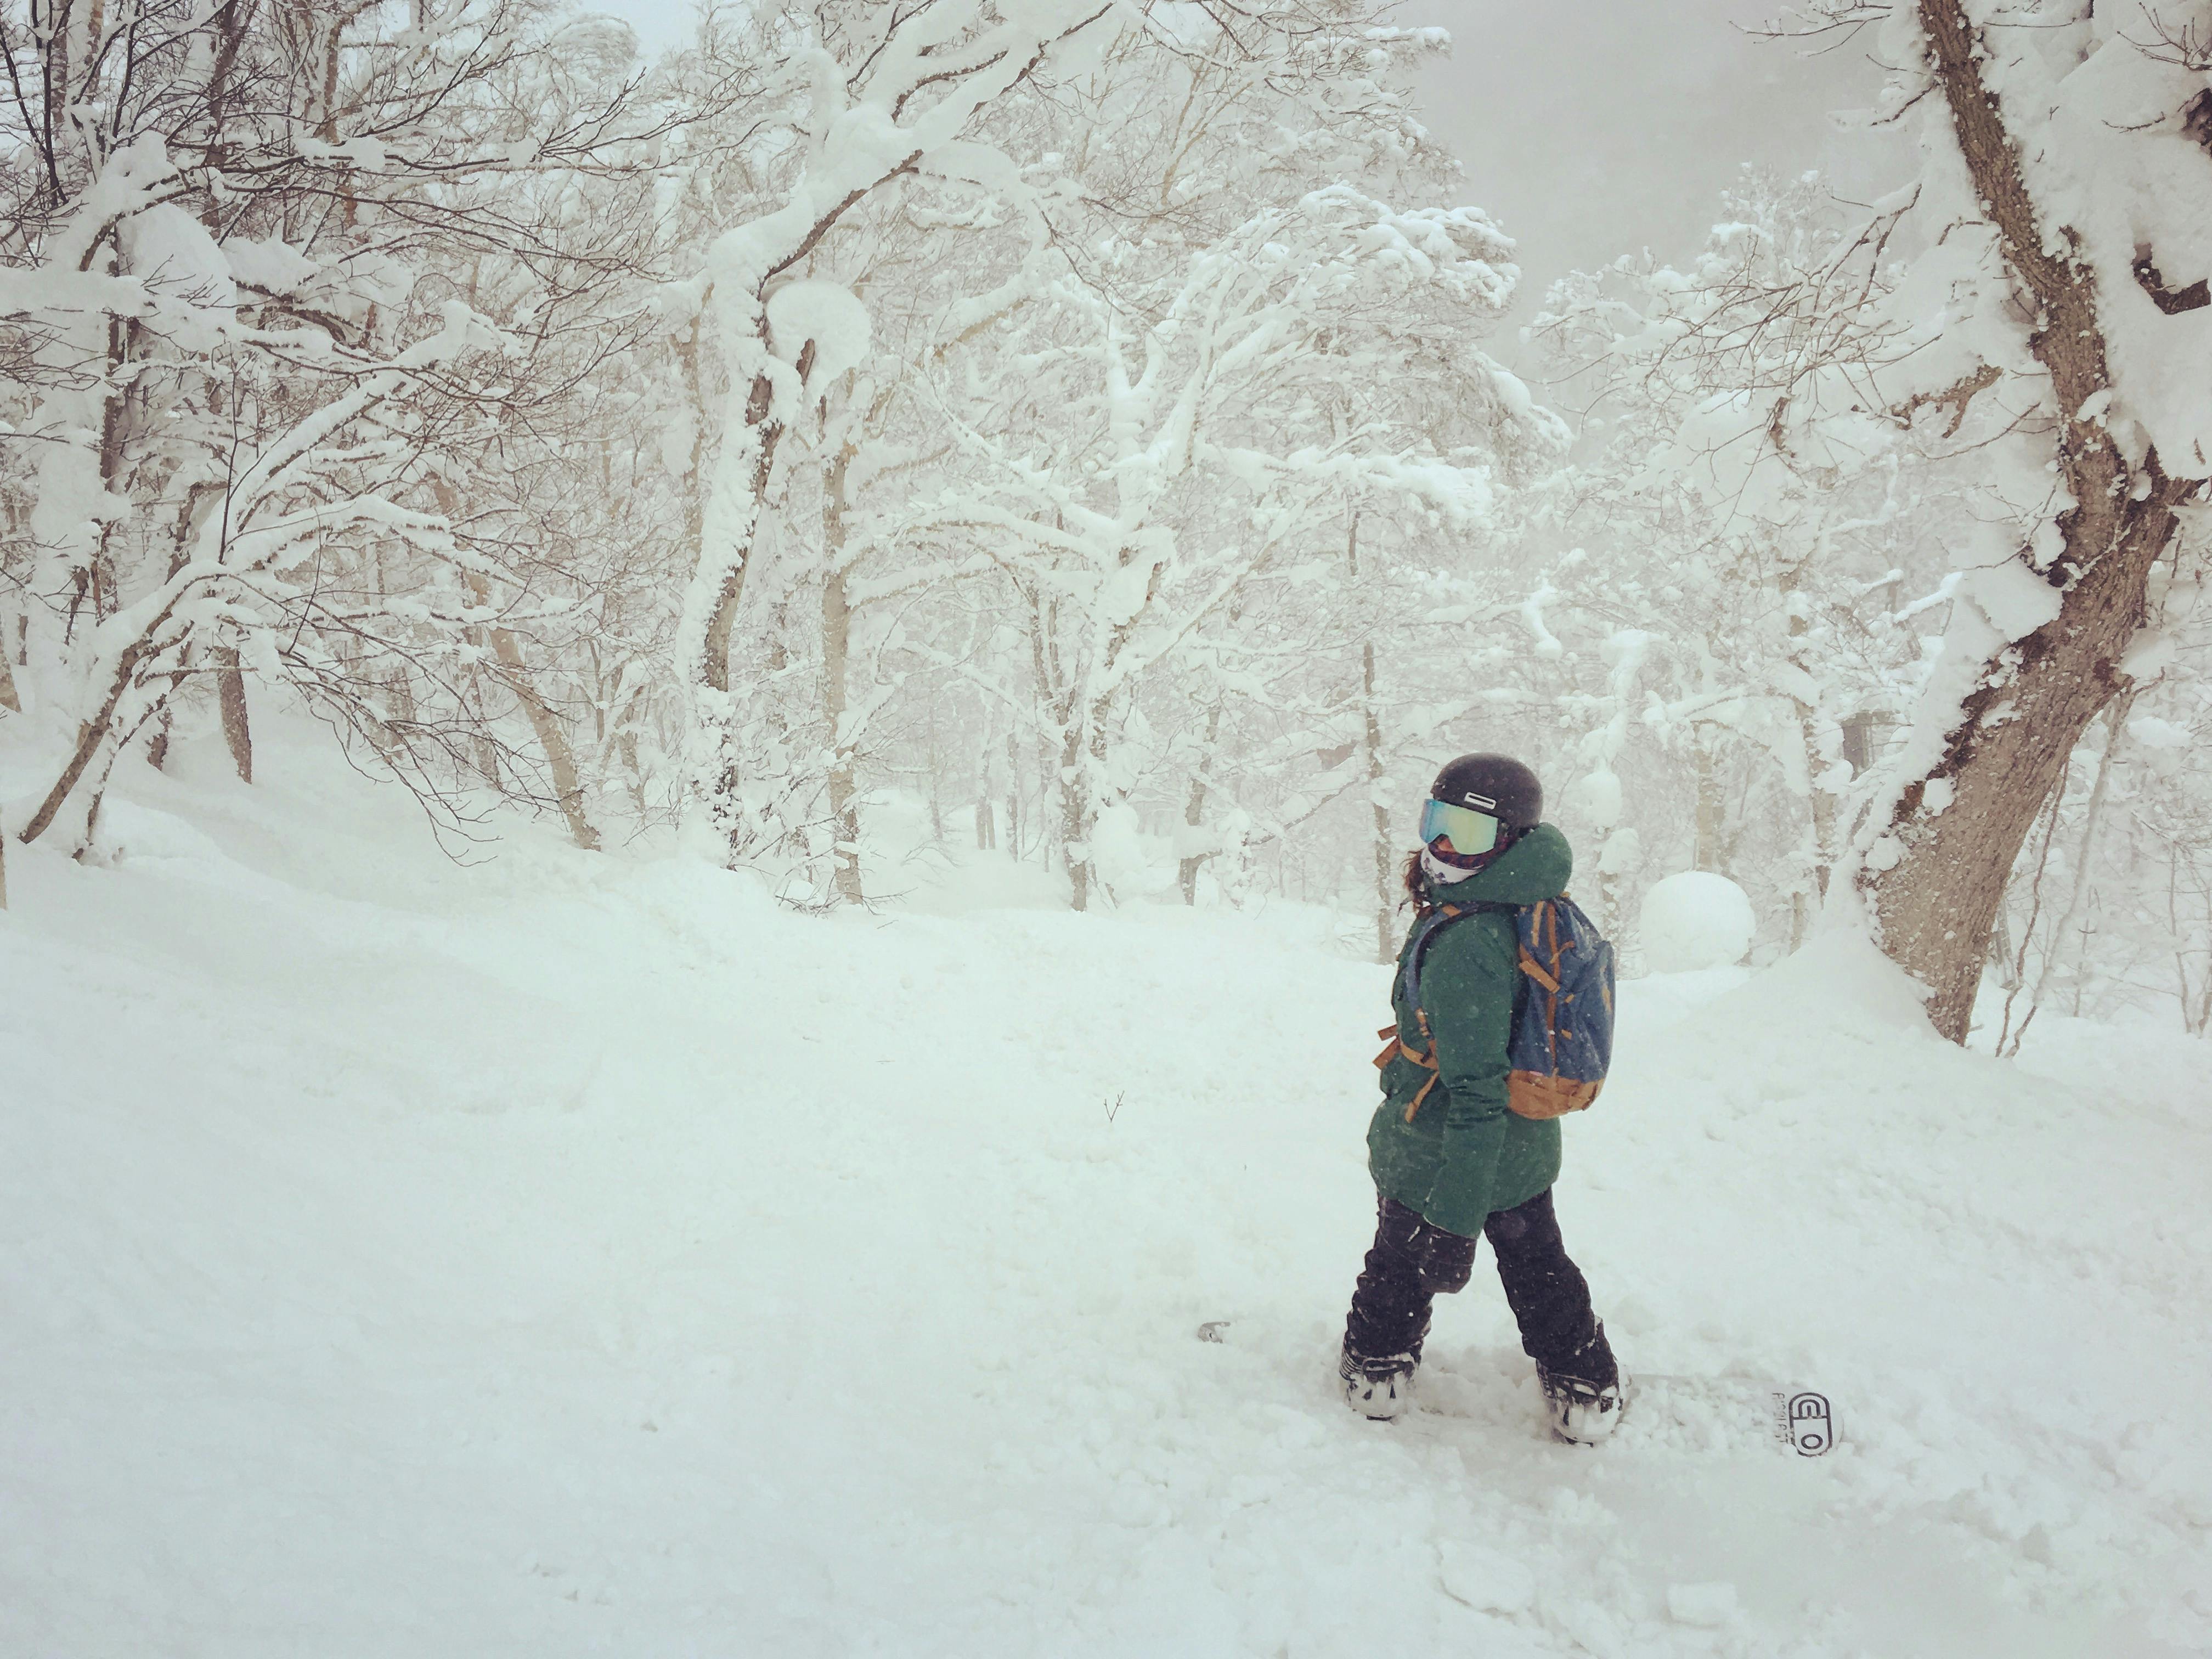 A snowboarder standing in a snowy, wooded area and wearing the Zeal Optics Beacon Goggles · 2021. 